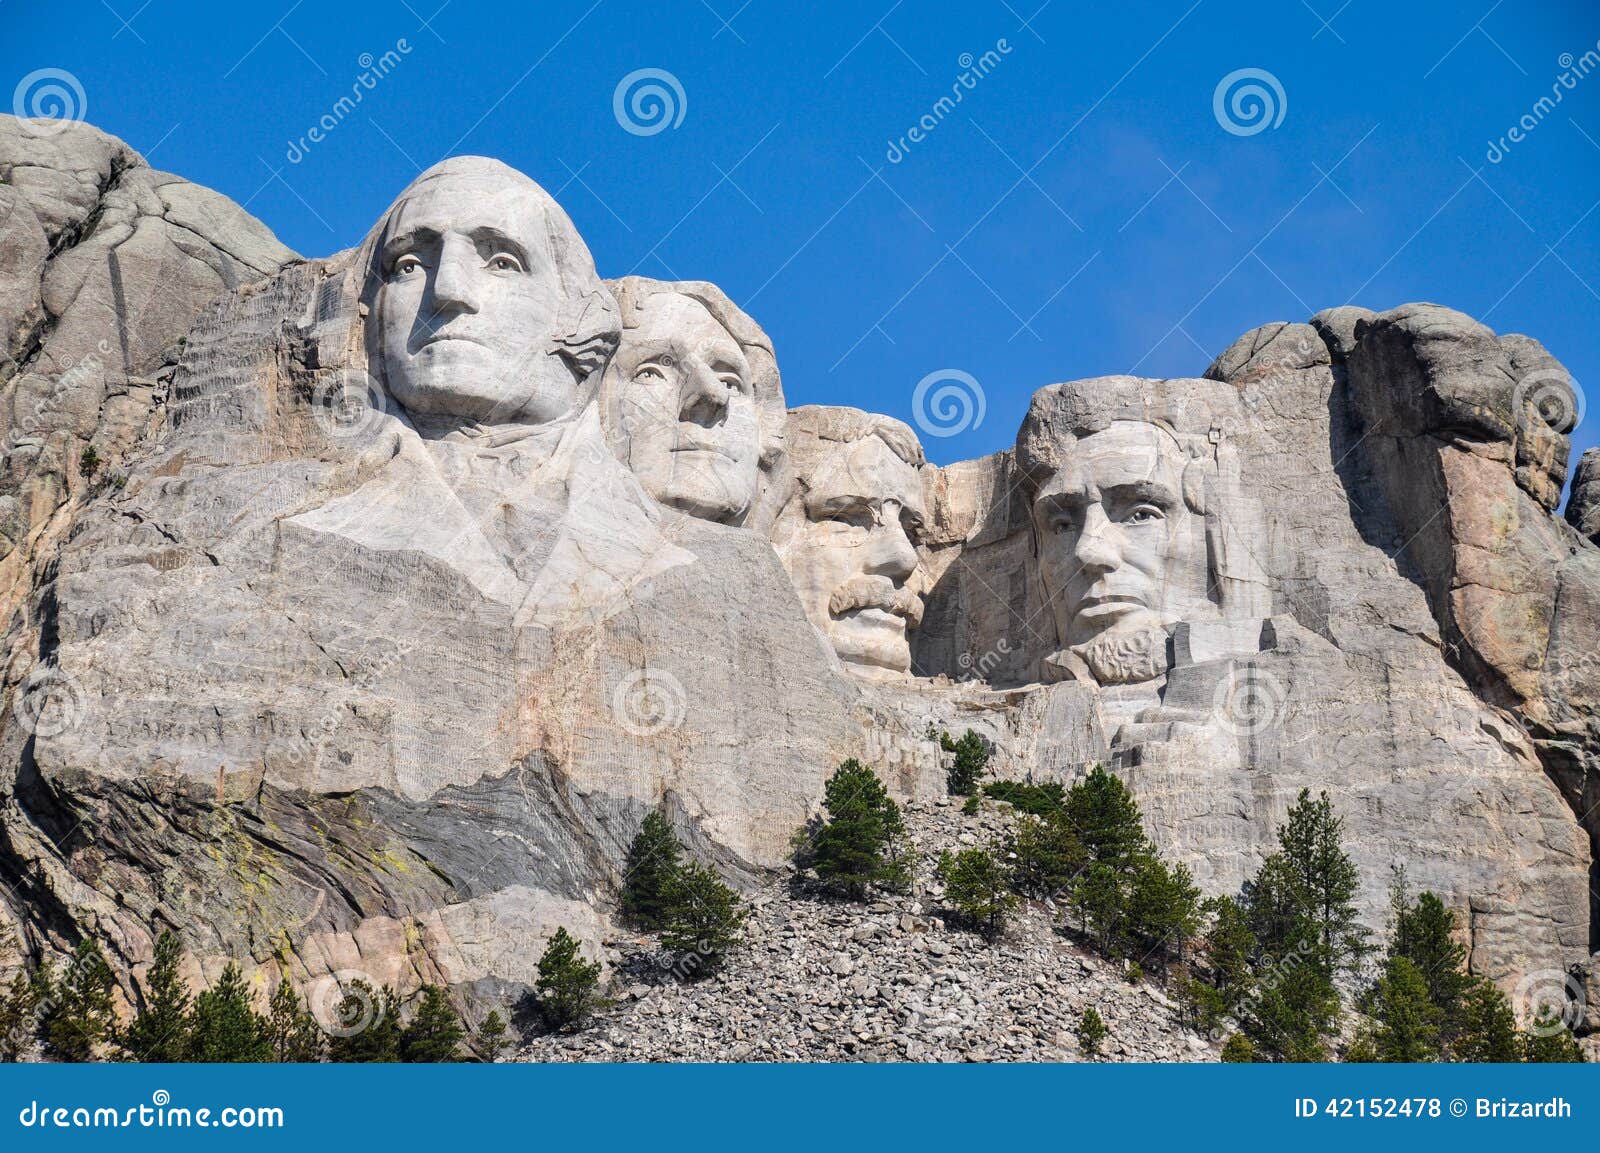 famous us presidents on mount rushmore national monument, south